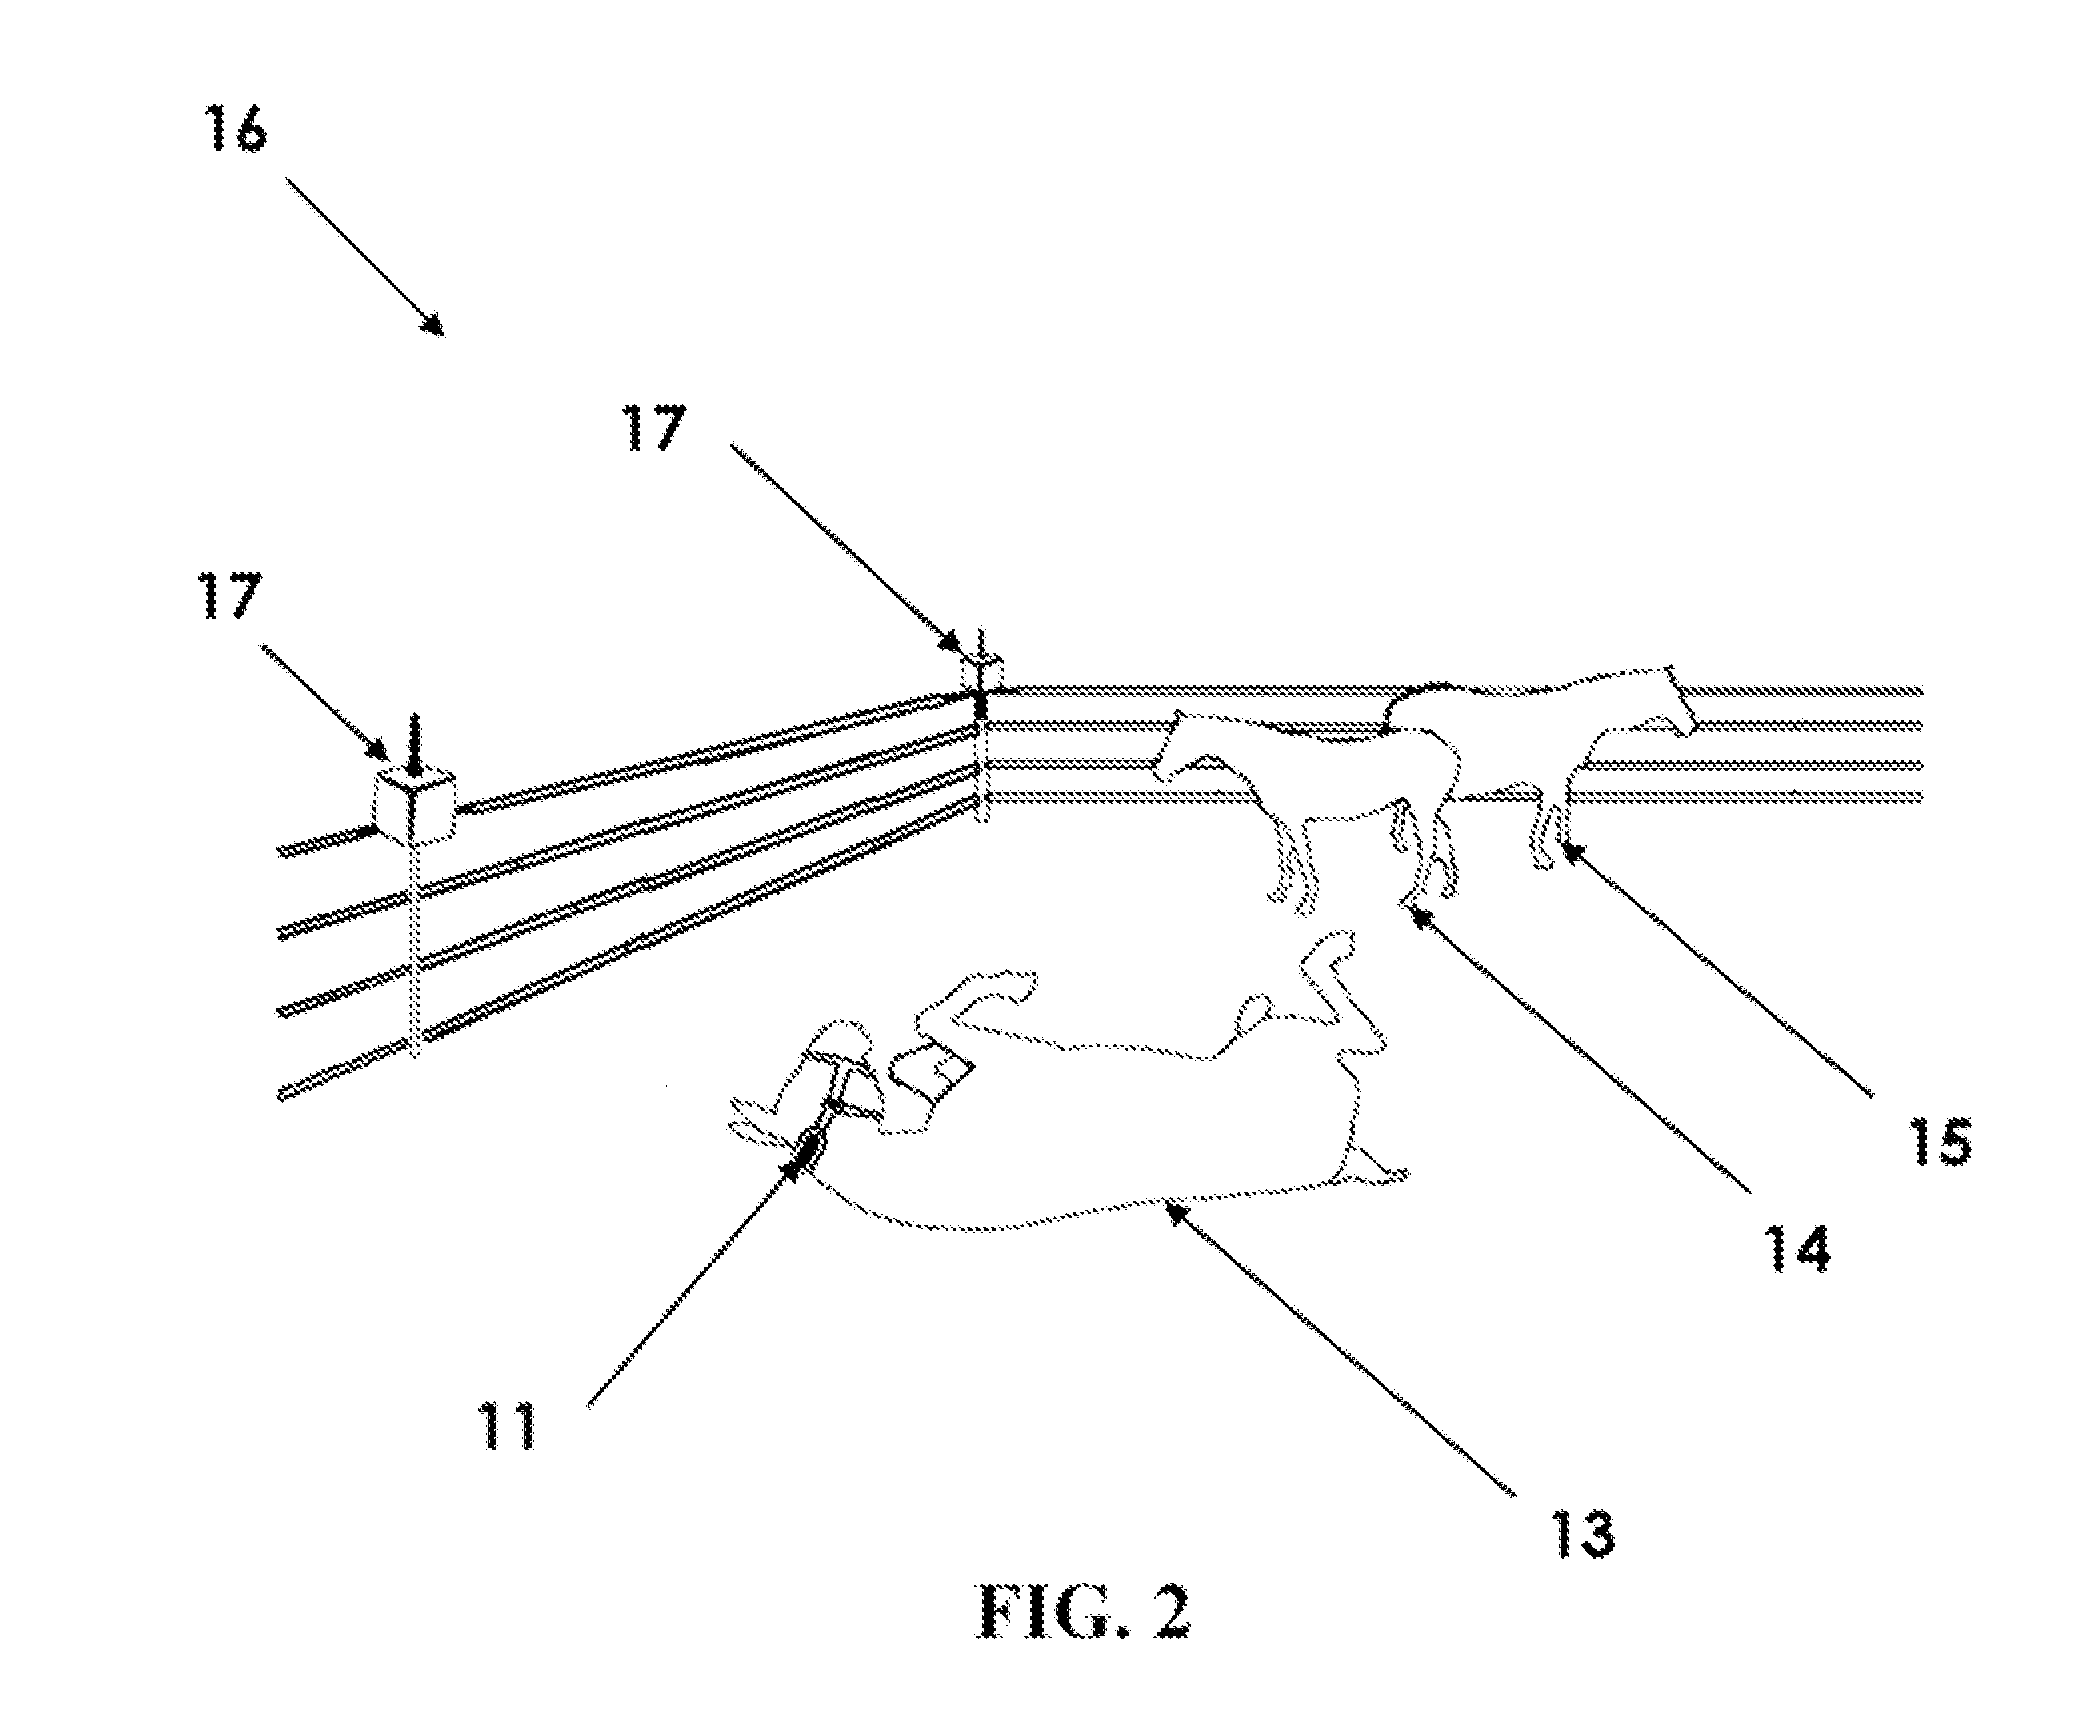 Device and Method for Remotely Monitoring Animal Behavior